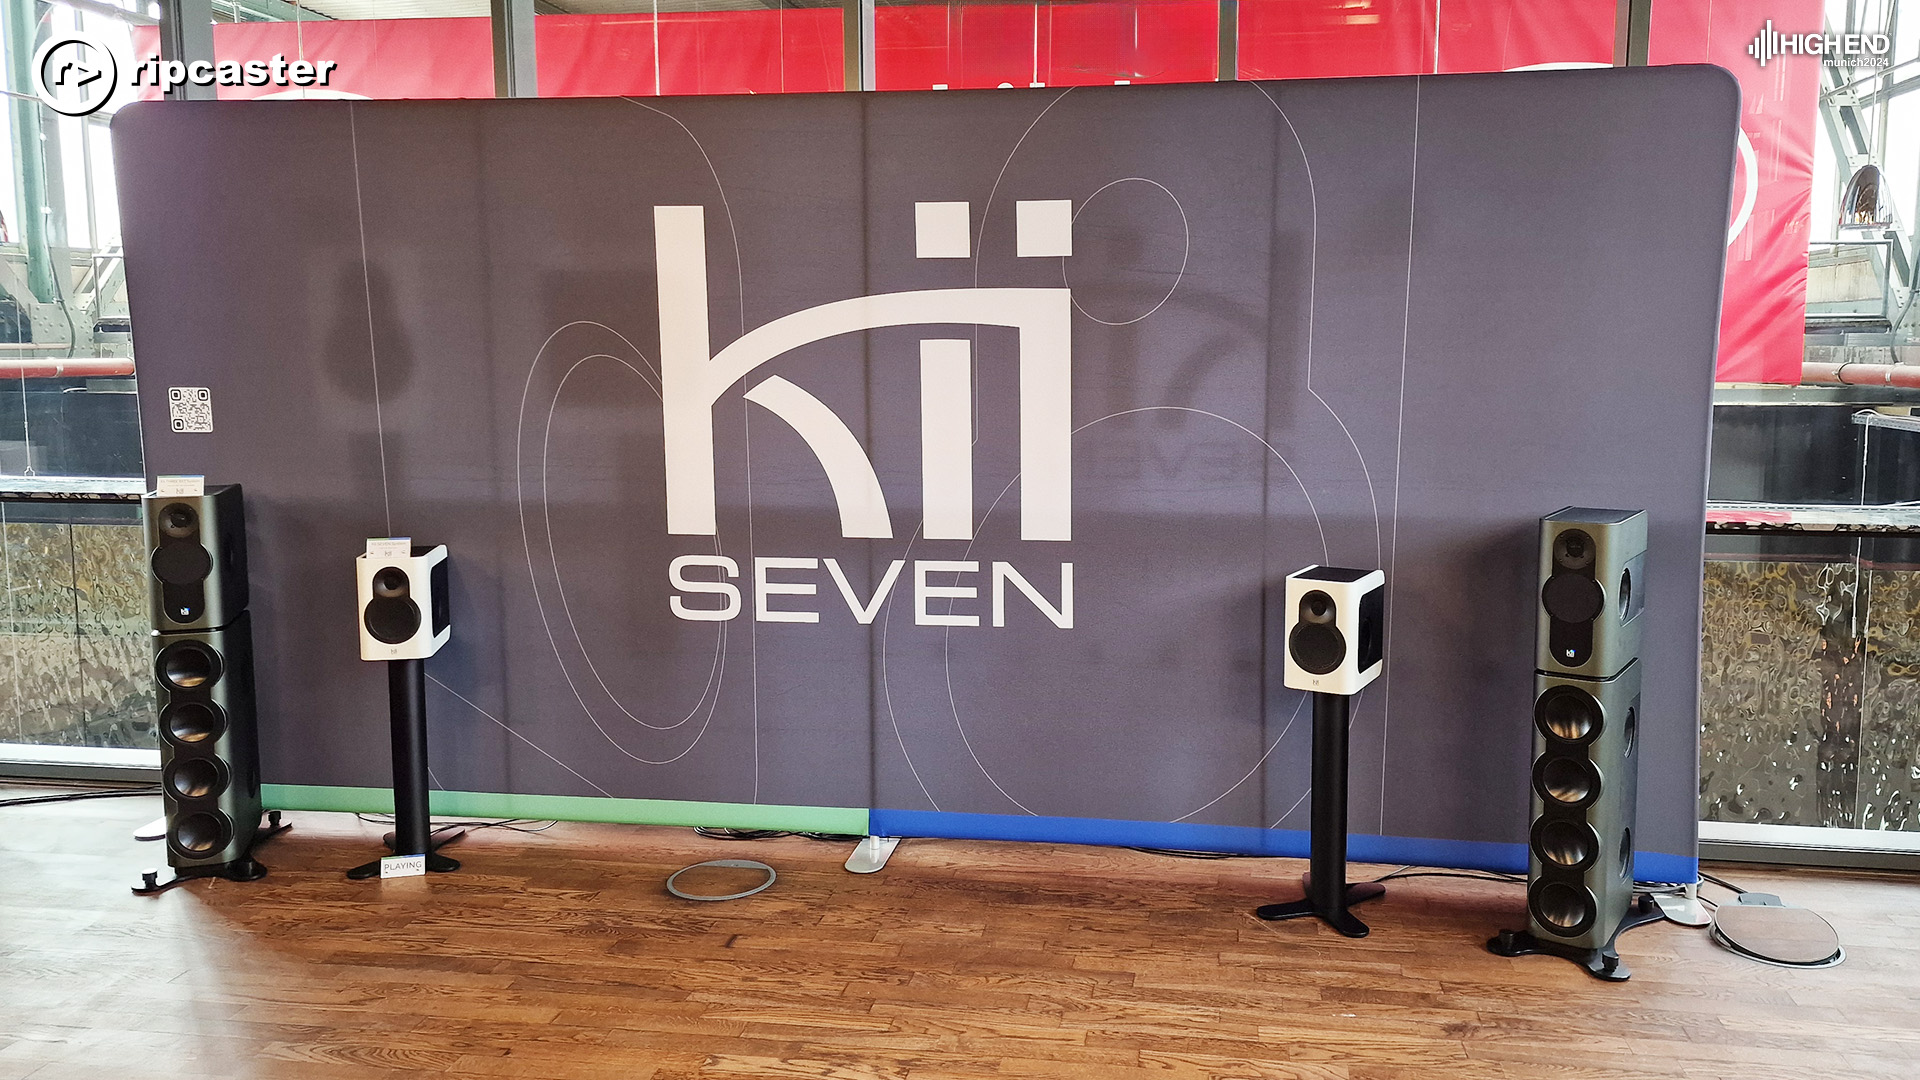 Two pairs of Kii speakers either side of the Kii backdrop.